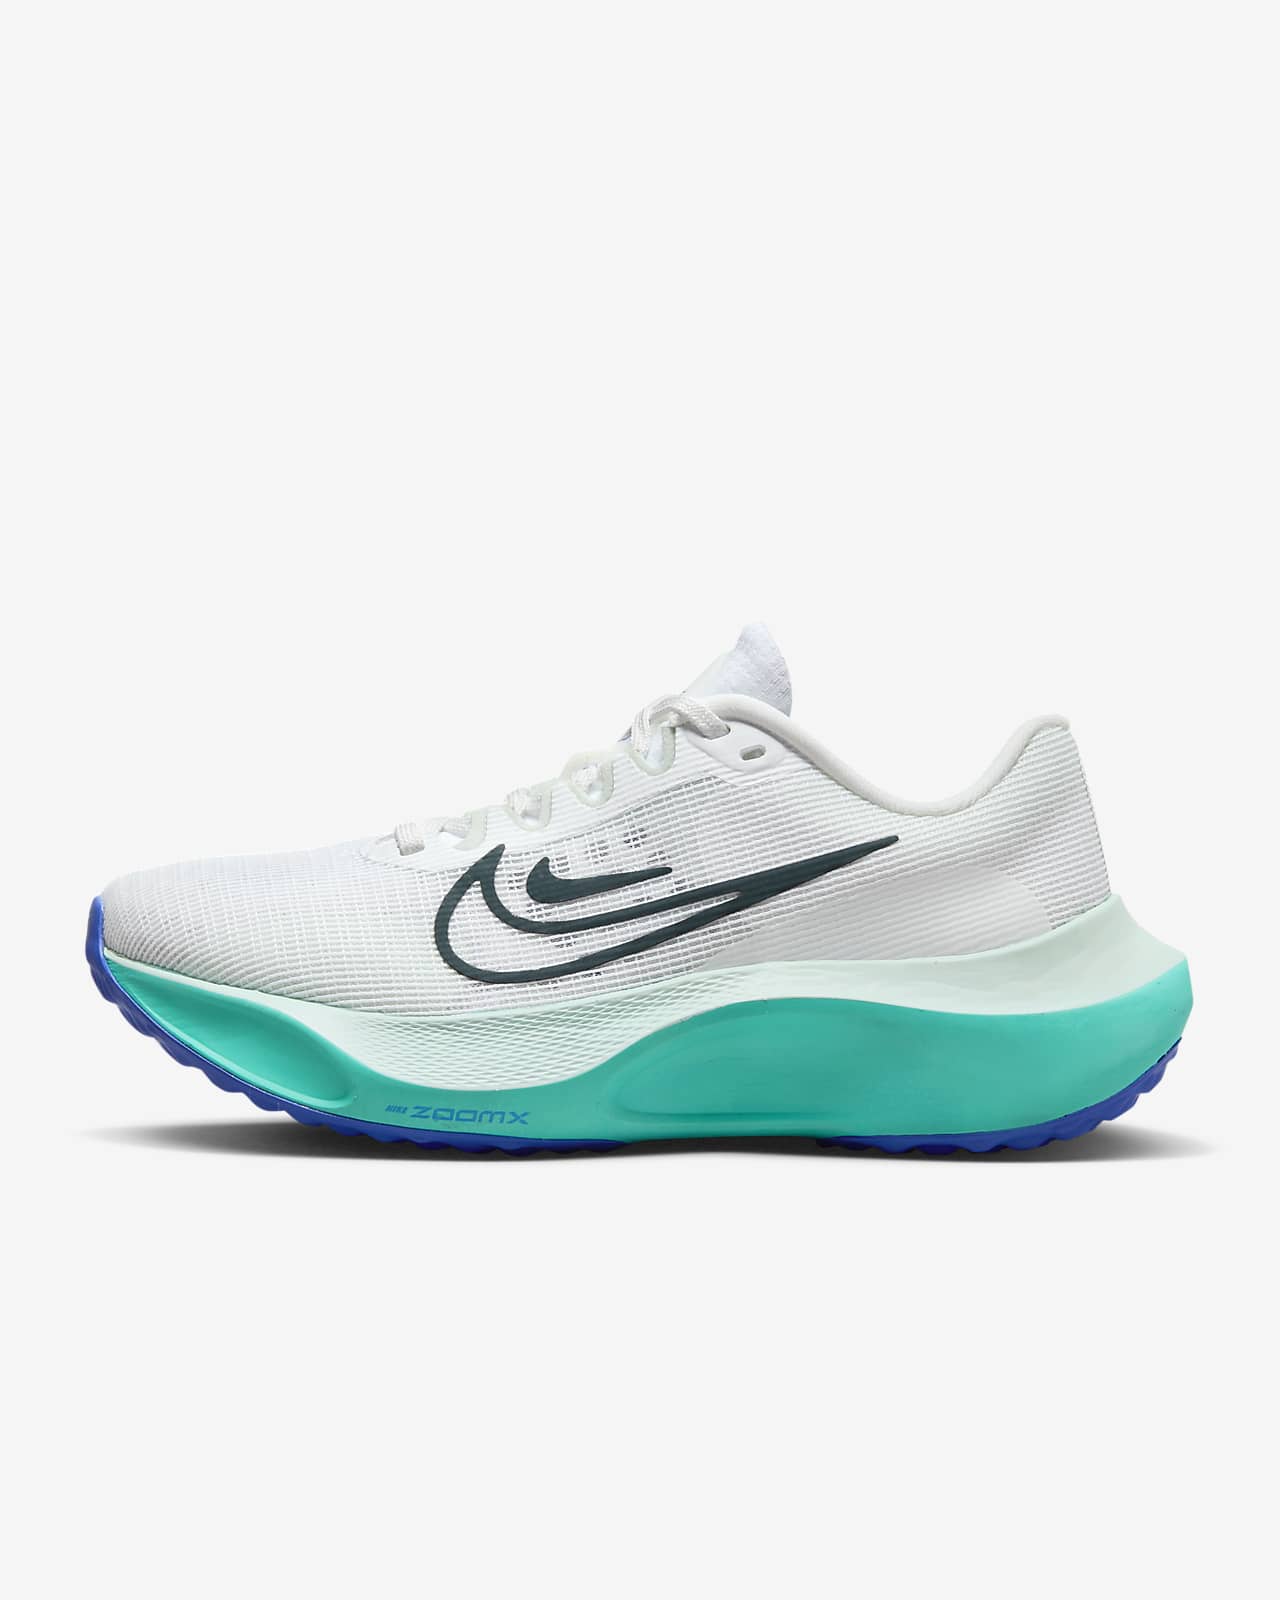 ballet Cayo Delicioso Nike Zoom Fly 5 Women's Road Running Shoes. Nike.com